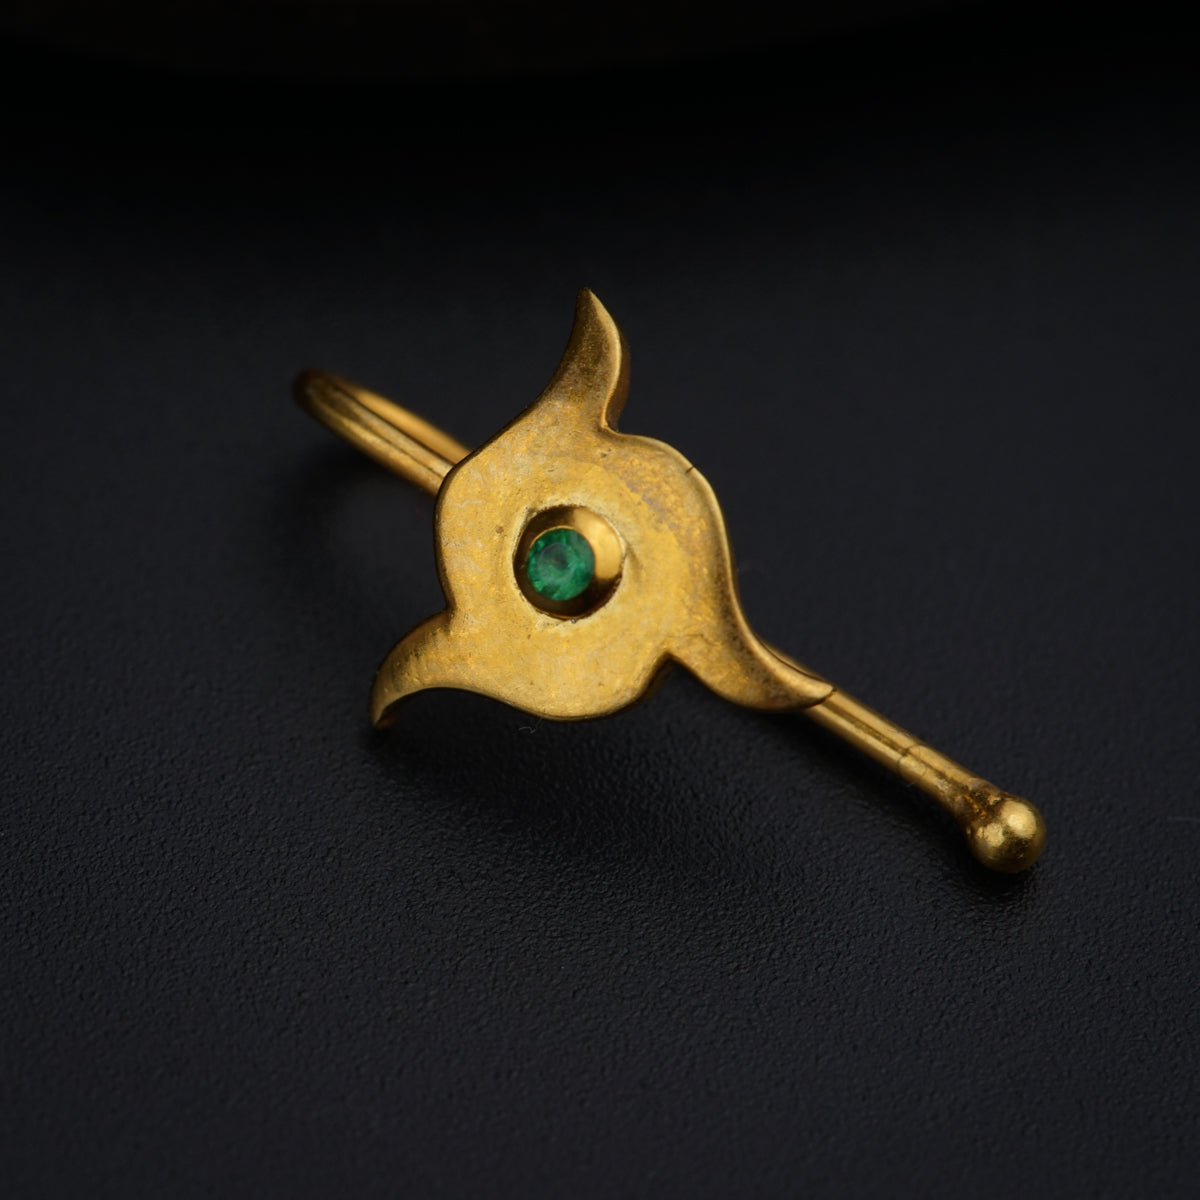 a gold brooch with a green stone in the center